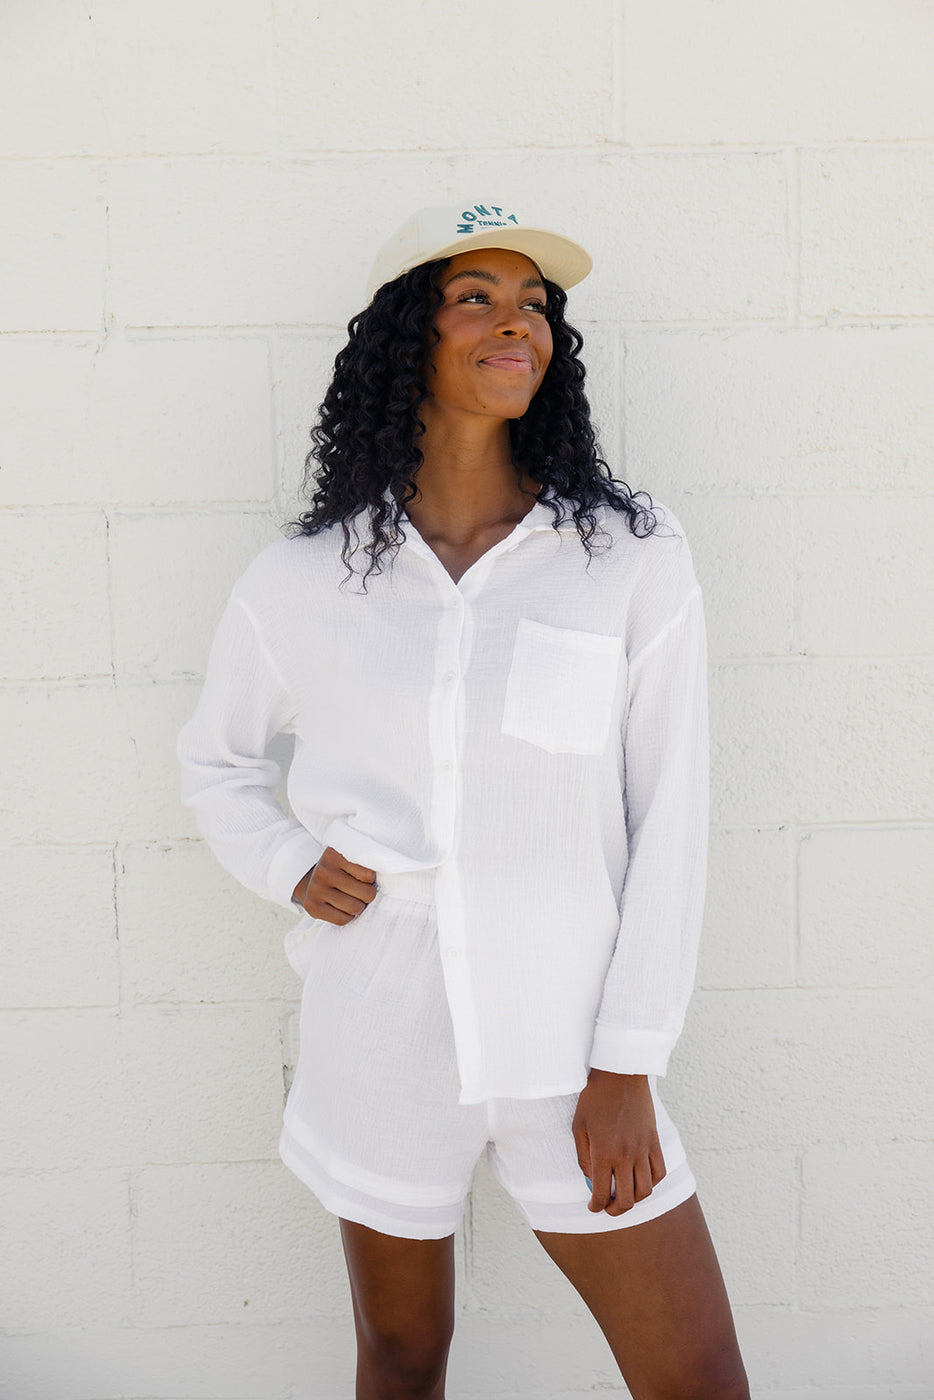 a woman in white outfit and hat